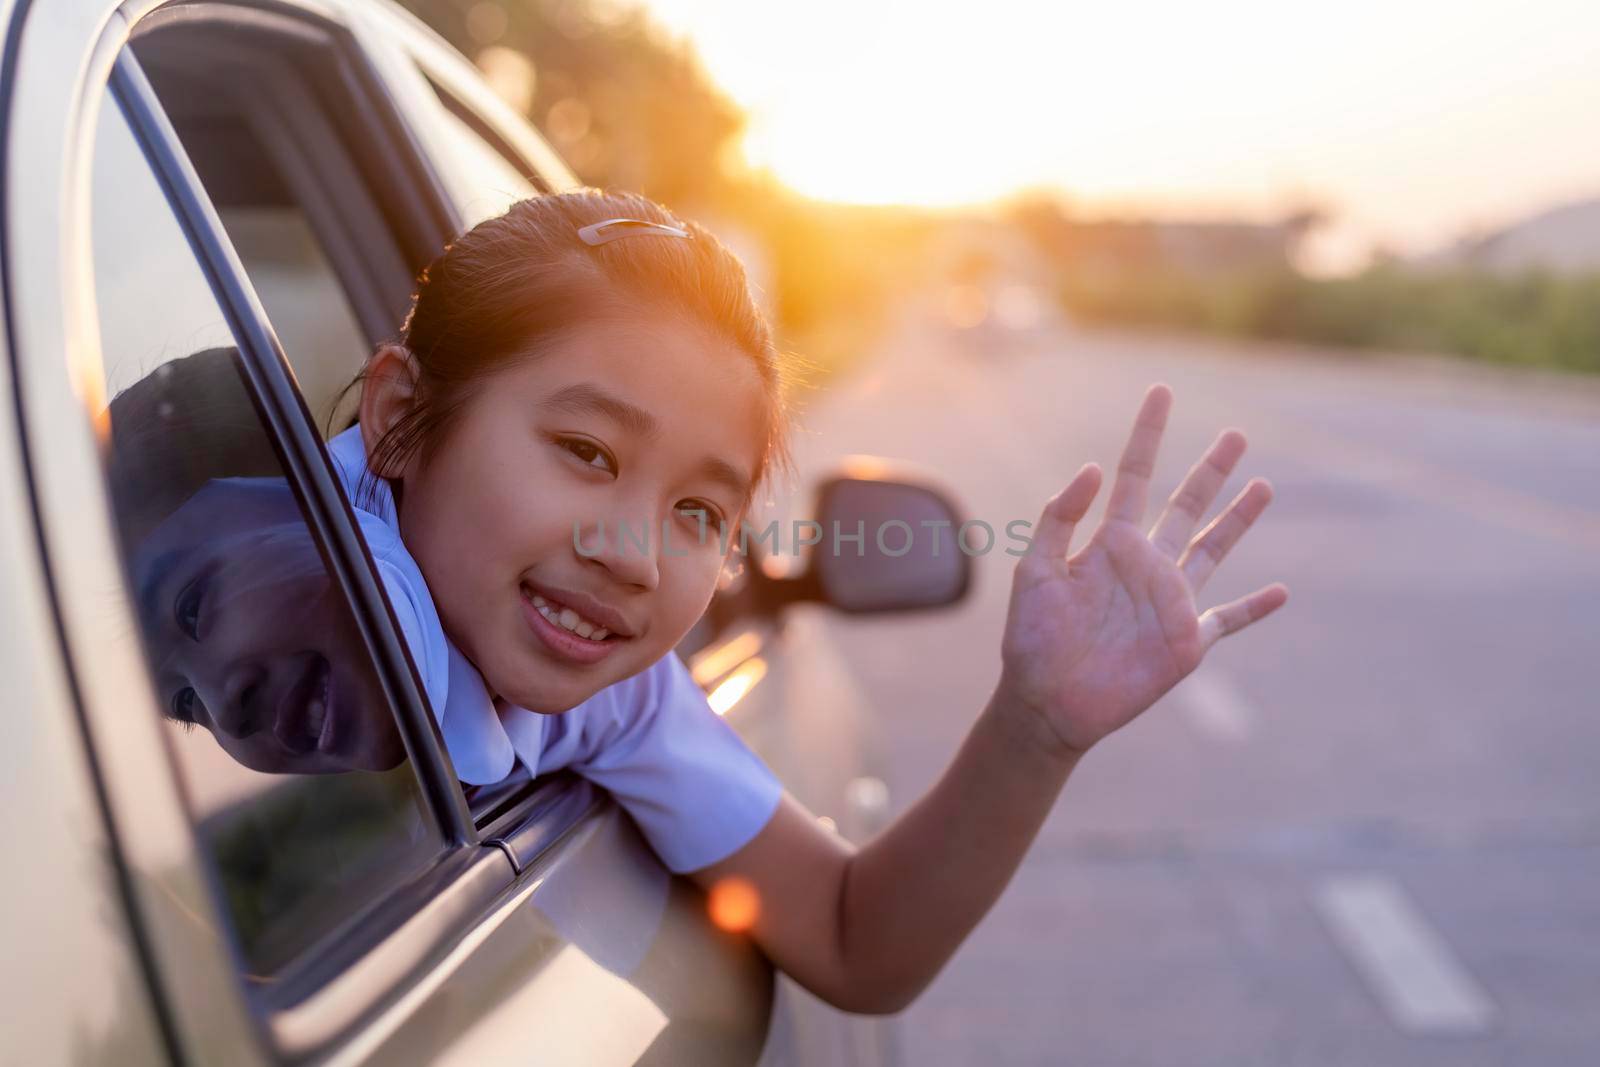 On the way to school, the little girl stretched out his hand from the car window, laughing and smiling. Asian little girl smiling  and waving hand out the car. Children relax with street view from the car. Family in car concept.